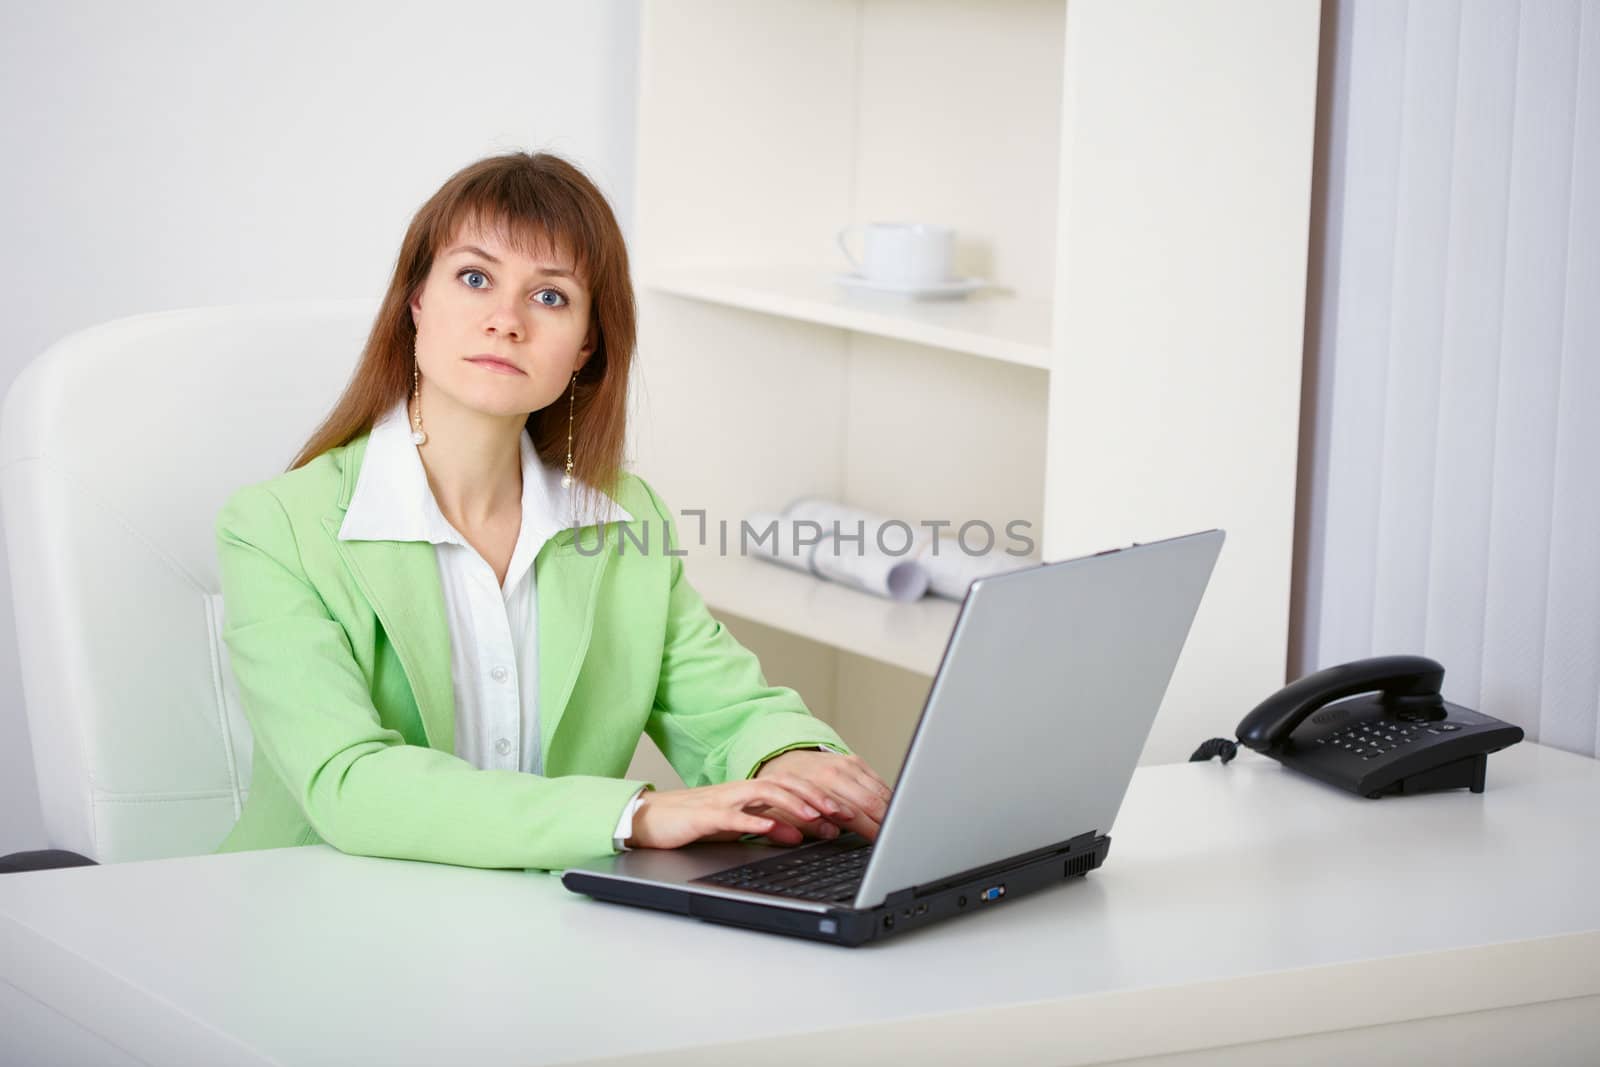 Women prevented from working on the computer